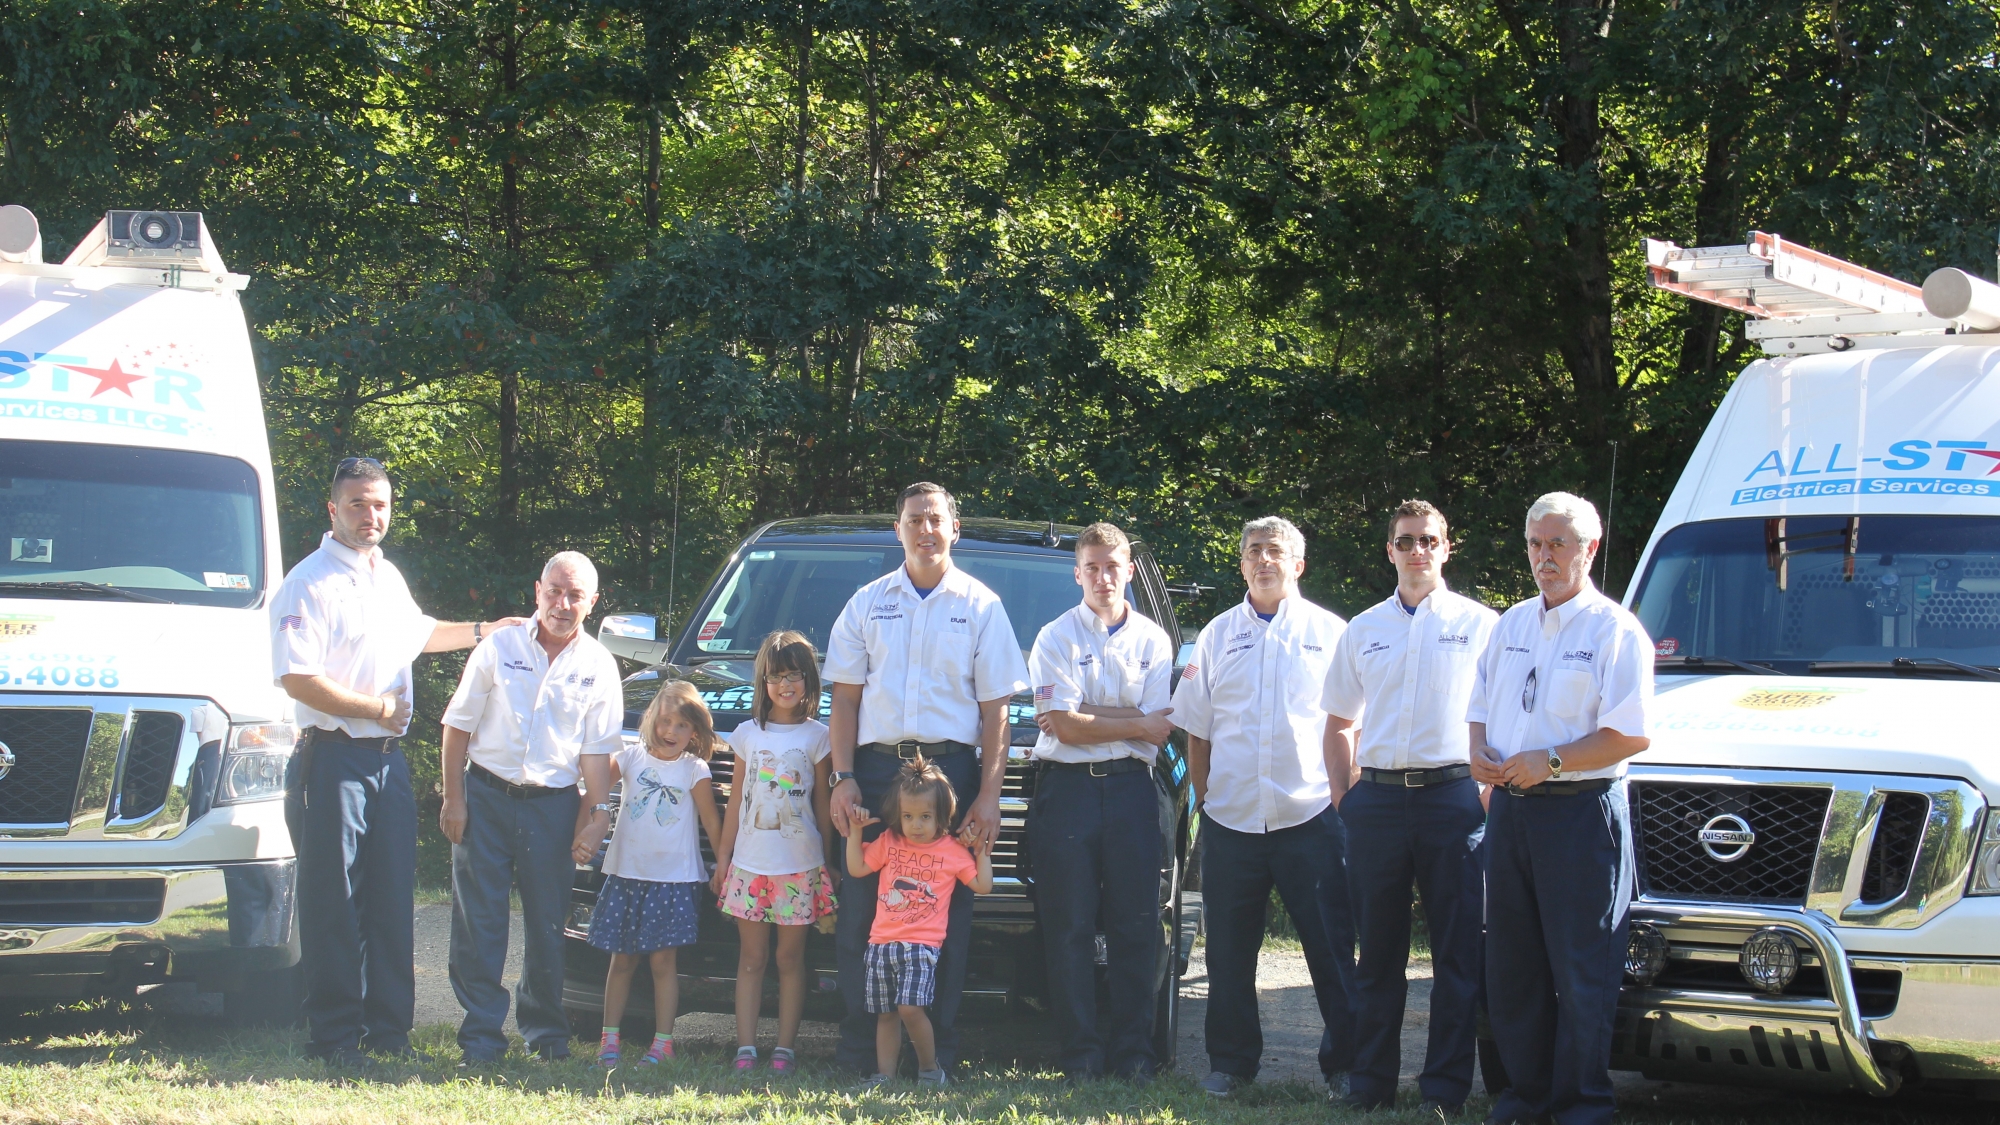 The men from All Star Electrical Services, LLC posing with their daughters